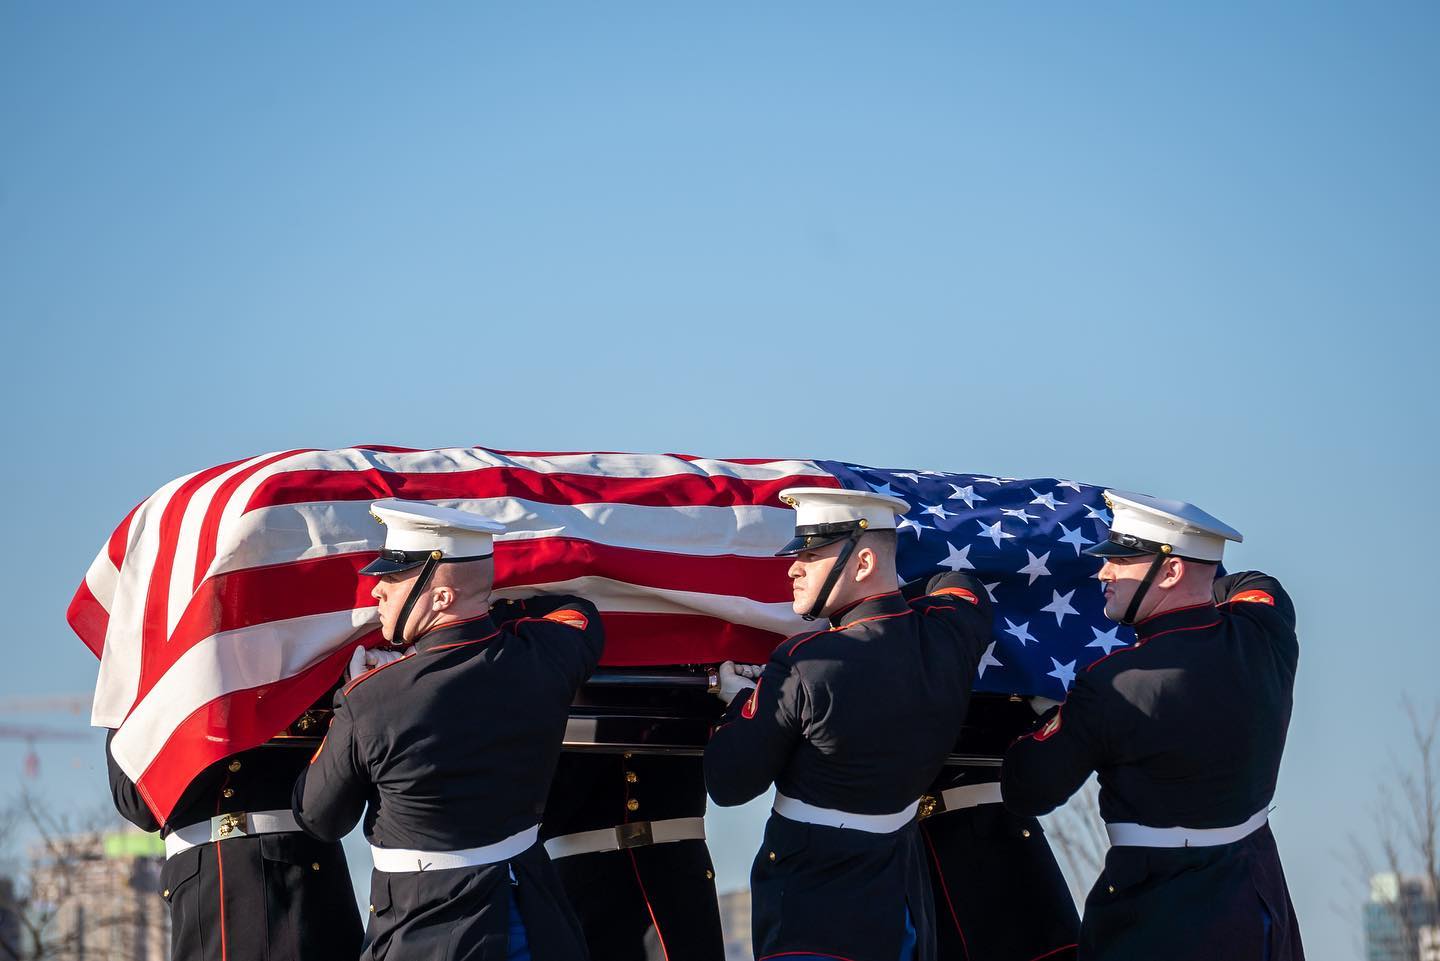 Members of the Marine Honor Guard carry a casket through section 57 of Arlington National Cemetery in Arlington, Virginia.